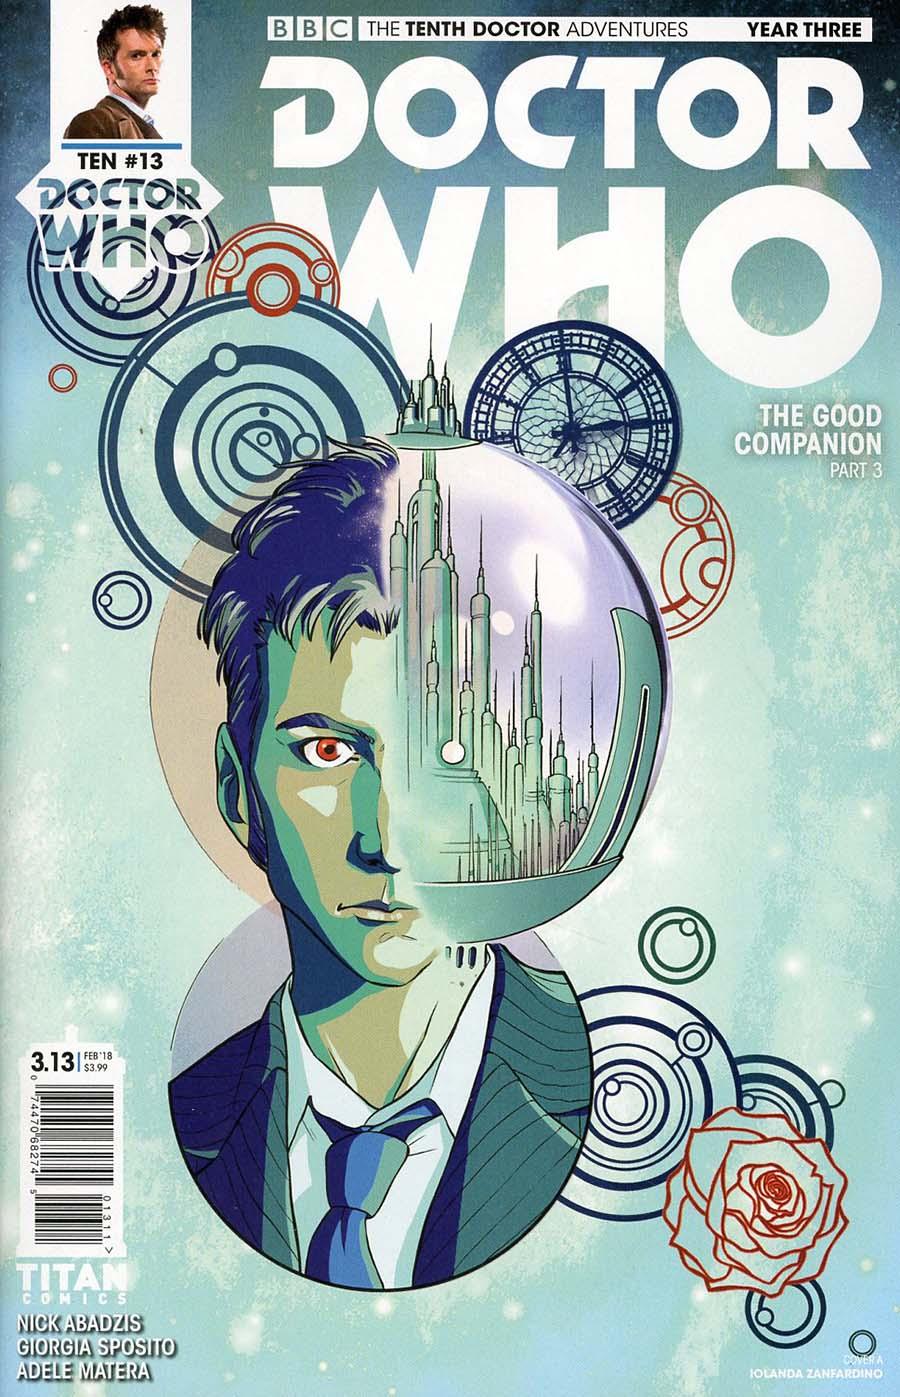 Doctor Who 10th Doctor Year Three Vol. 1 #13